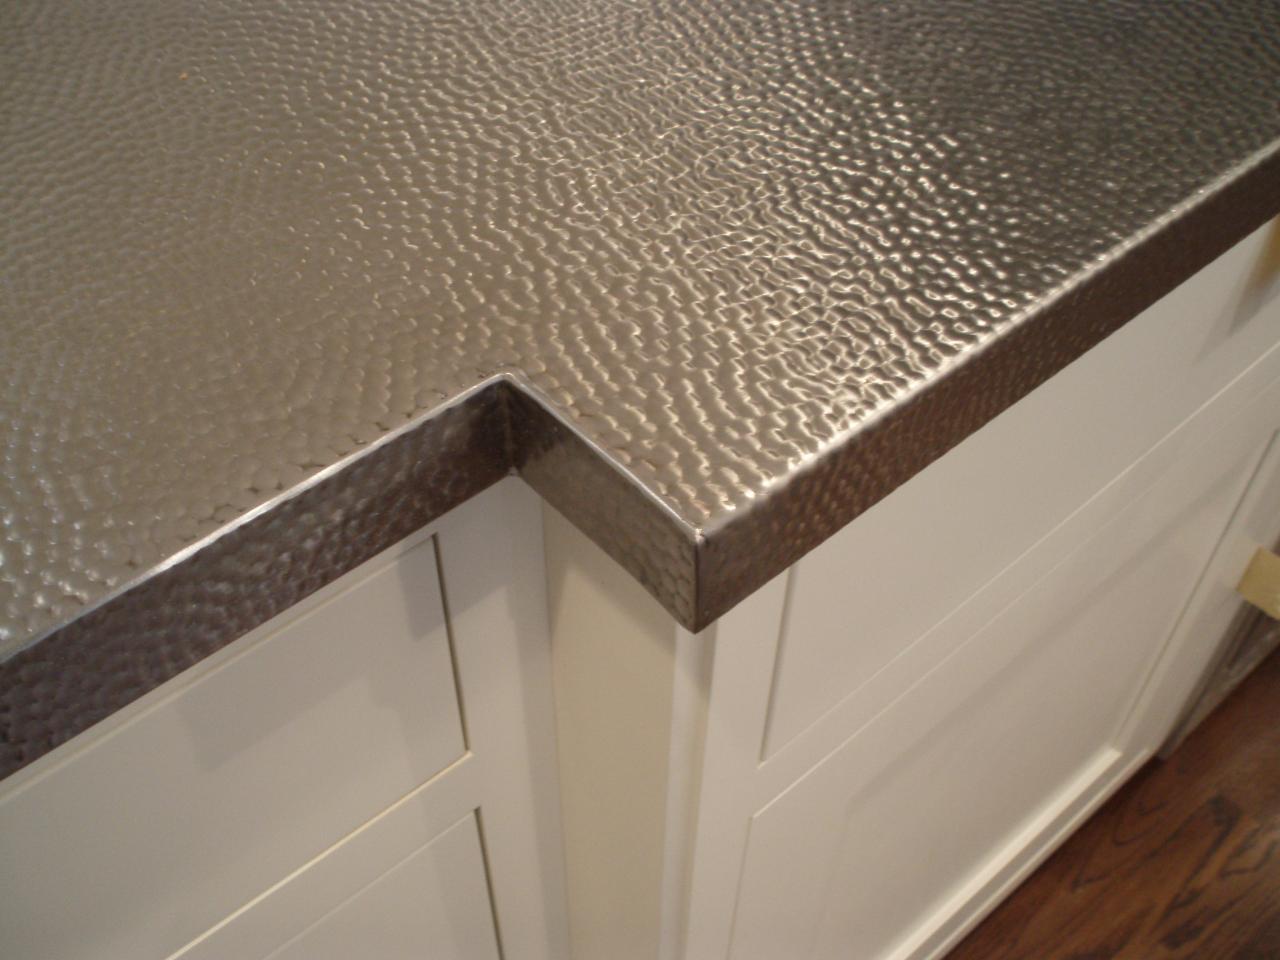 Stainless Steel Kitchen Countertop, Stainless Steel Countertop Edging